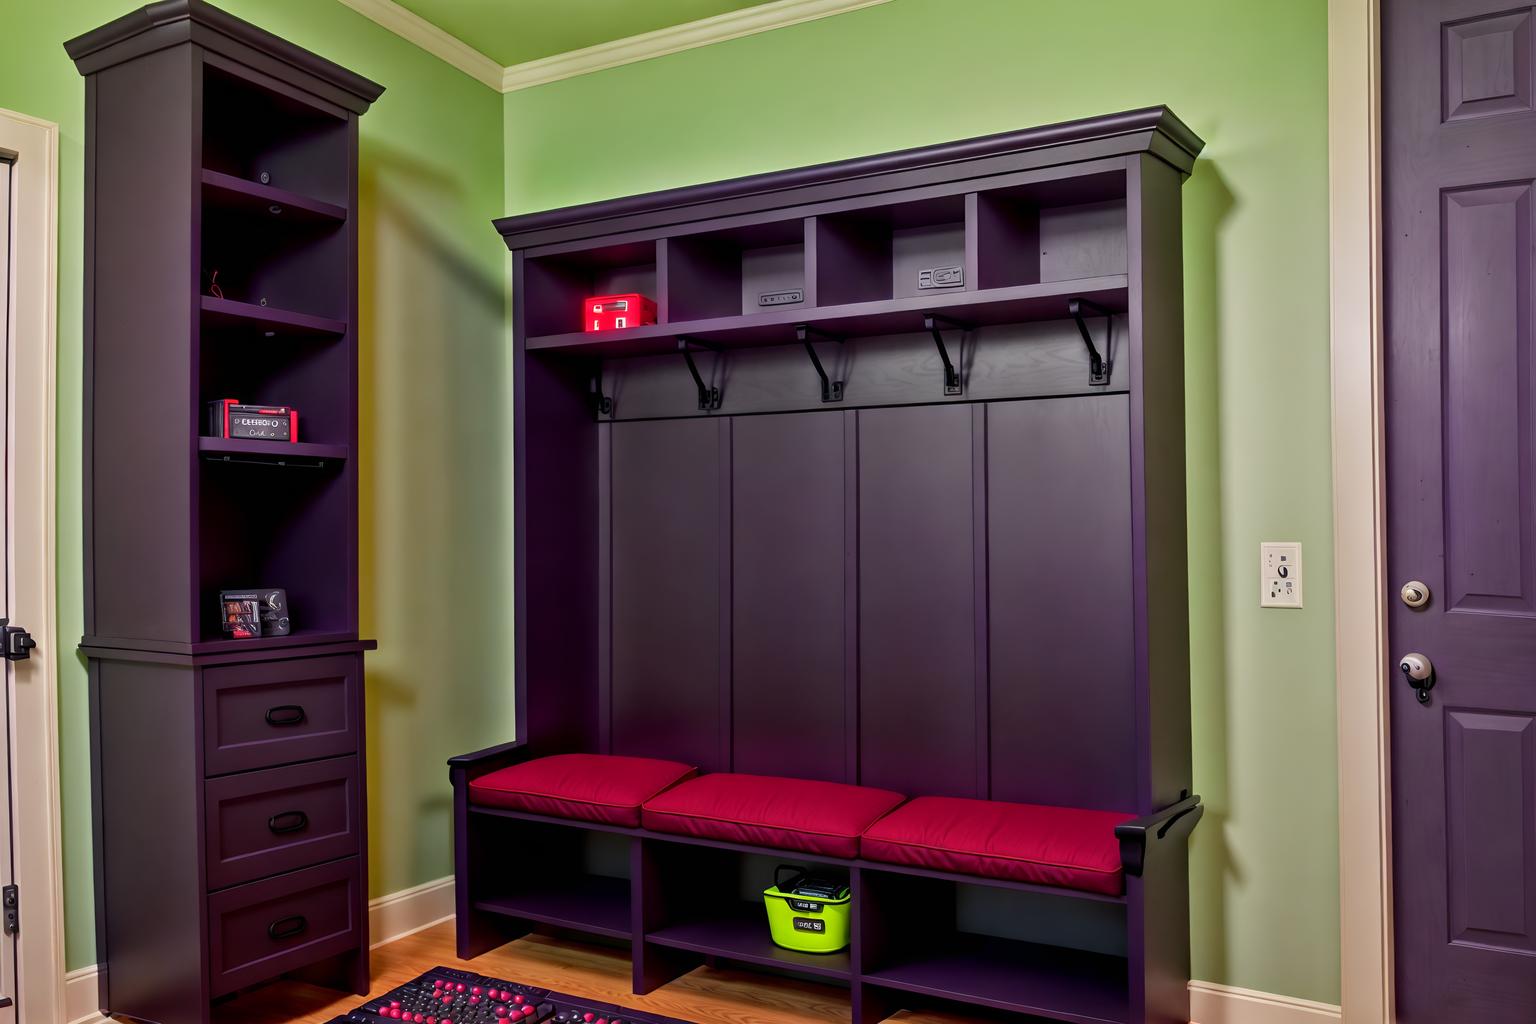 gaming room-style (mudroom interior) with a bench and storage baskets and storage drawers and shelves for shoes and cabinets and cubbies and wall hooks for coats and high up storage. . with multiple displays and gaming chair and dark room and purple and red lights and computer desk with computer displays and keyboard and neon lights and dark walls and purple, red and blue fade light. . cinematic photo, highly detailed, cinematic lighting, ultra-detailed, ultrarealistic, photorealism, 8k. gaming room interior design style. masterpiece, cinematic light, ultrarealistic+, photorealistic+, 8k, raw photo, realistic, sharp focus on eyes, (symmetrical eyes), (intact eyes), hyperrealistic, highest quality, best quality, , highly detailed, masterpiece, best quality, extremely detailed 8k wallpaper, masterpiece, best quality, ultra-detailed, best shadow, detailed background, detailed face, detailed eyes, high contrast, best illumination, detailed face, dulux, caustic, dynamic angle, detailed glow. dramatic lighting. highly detailed, insanely detailed hair, symmetrical, intricate details, professionally retouched, 8k high definition. strong bokeh. award winning photo.